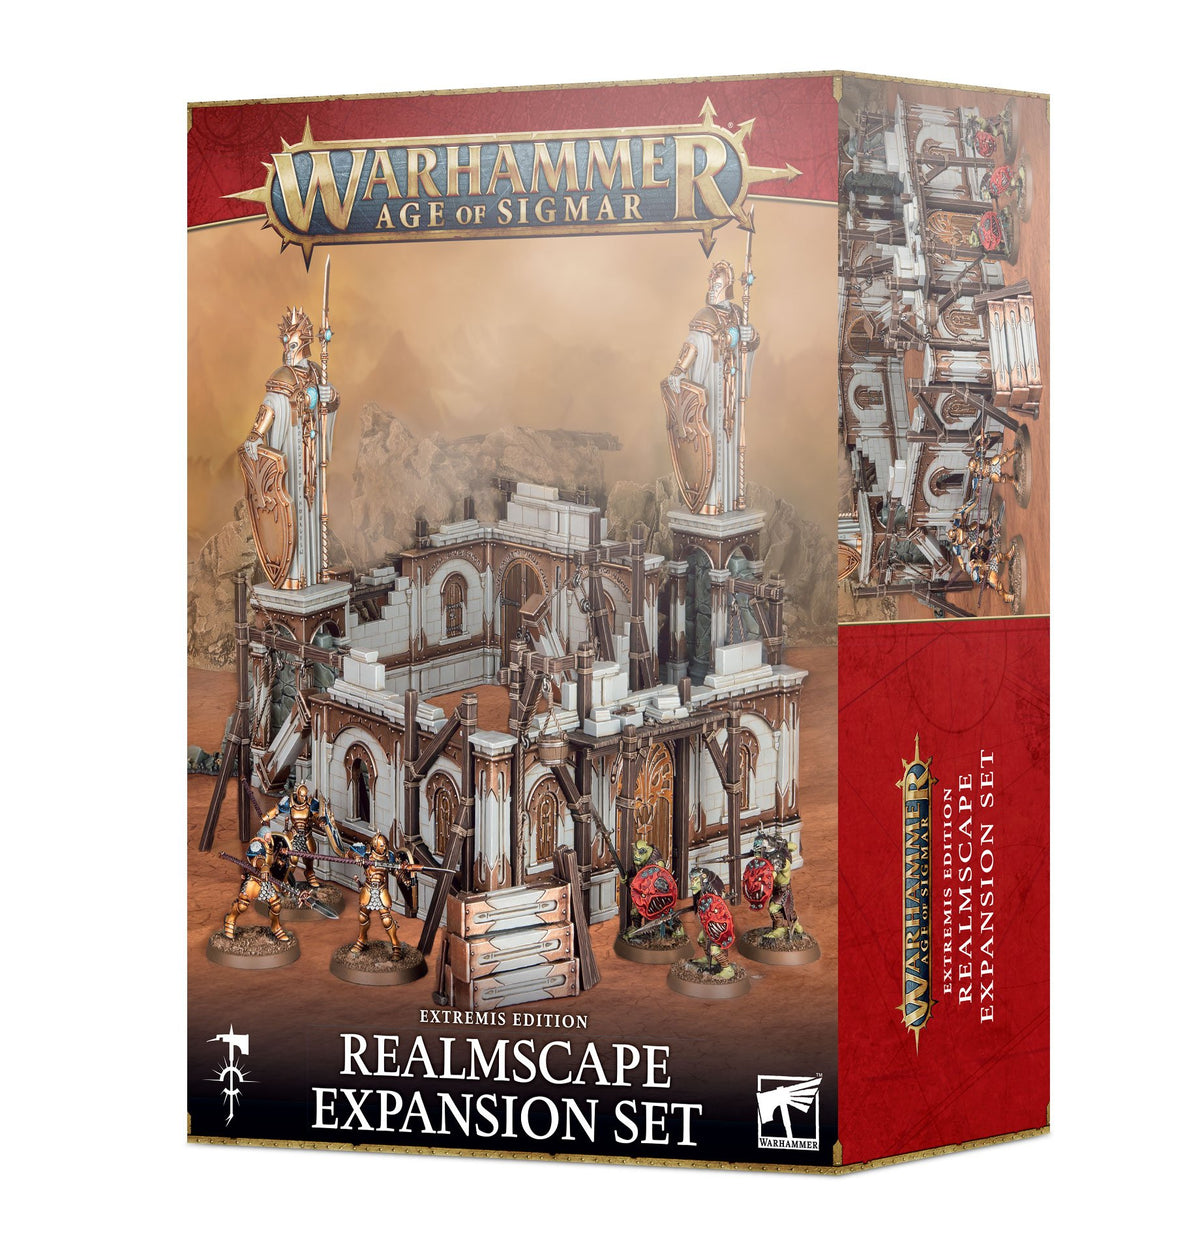 Realmscape - Extremis Edition Expansion Set (Warhammer Age of Sigmar)